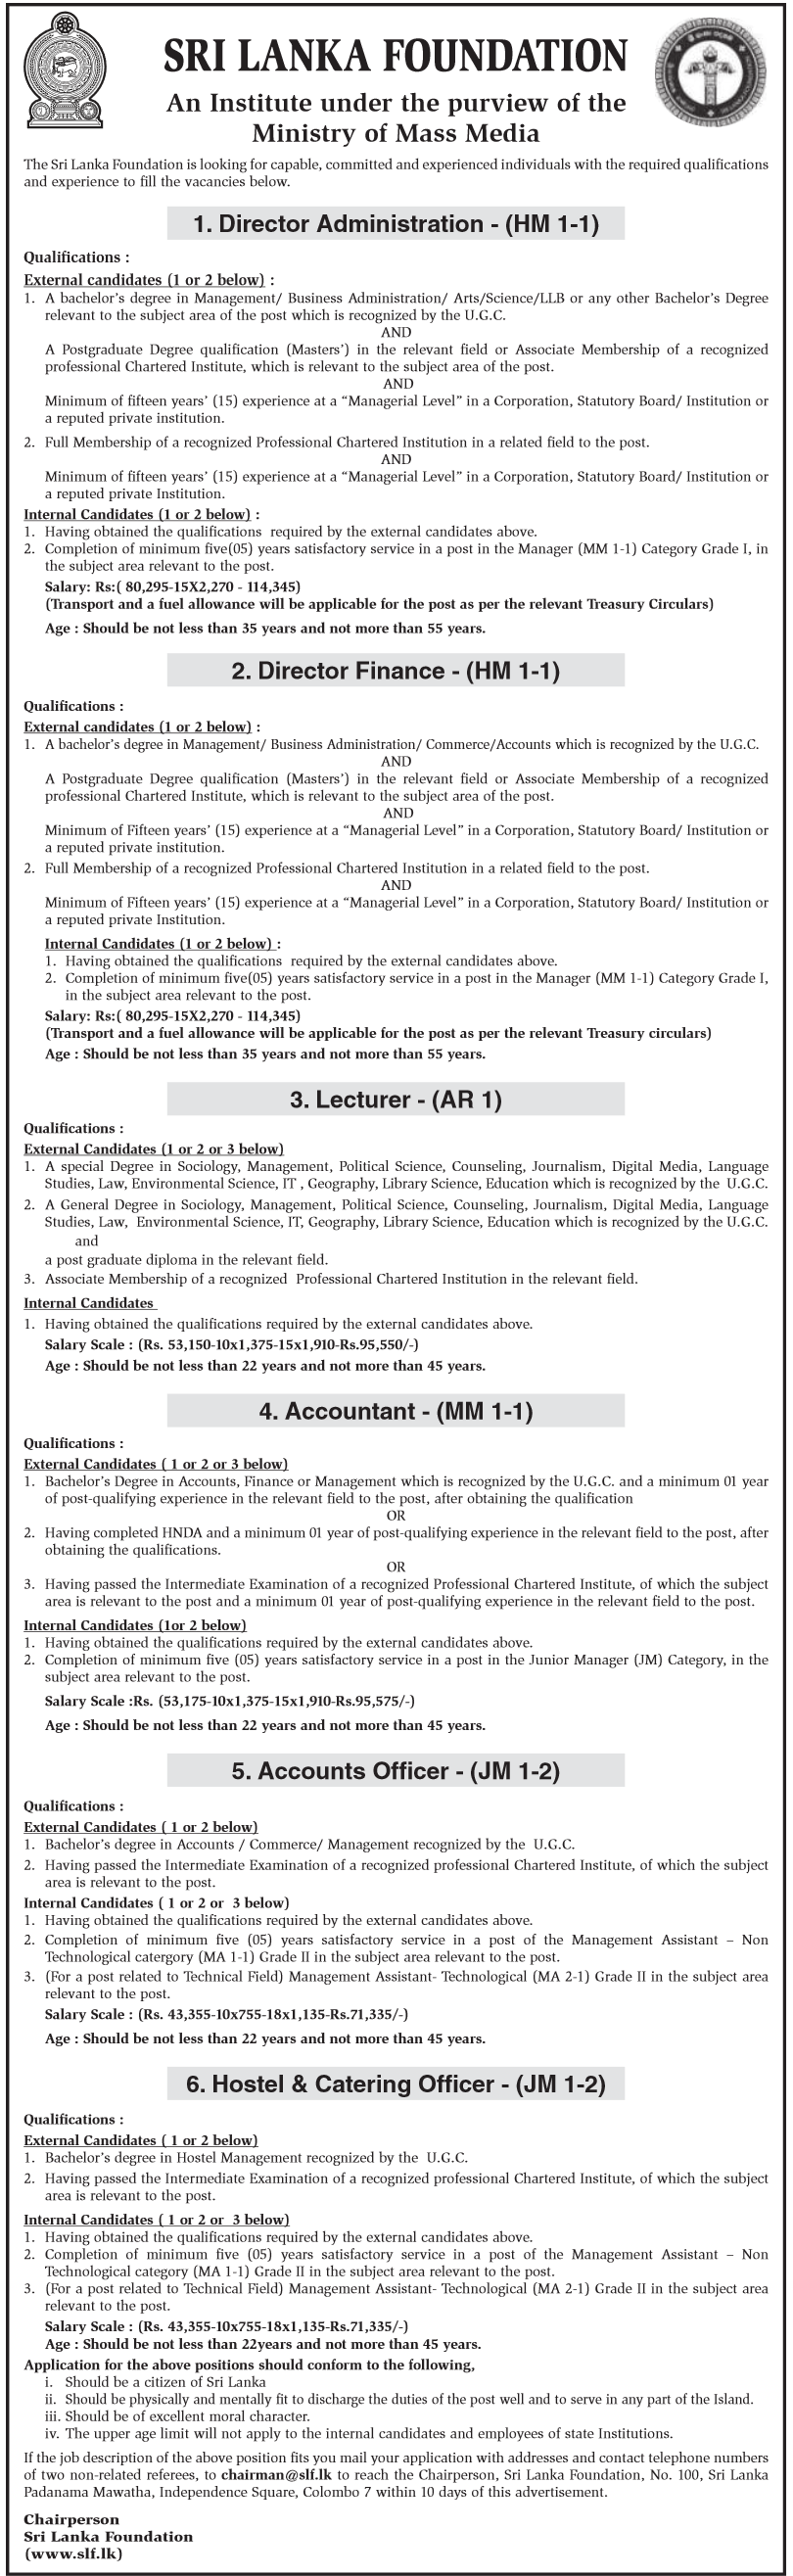 Accountant, Accounts Officer, Hostel and Catering Officer, Lecturer, Director (Administration, Finance) 2021 – Sri Lanka Foundation Institute